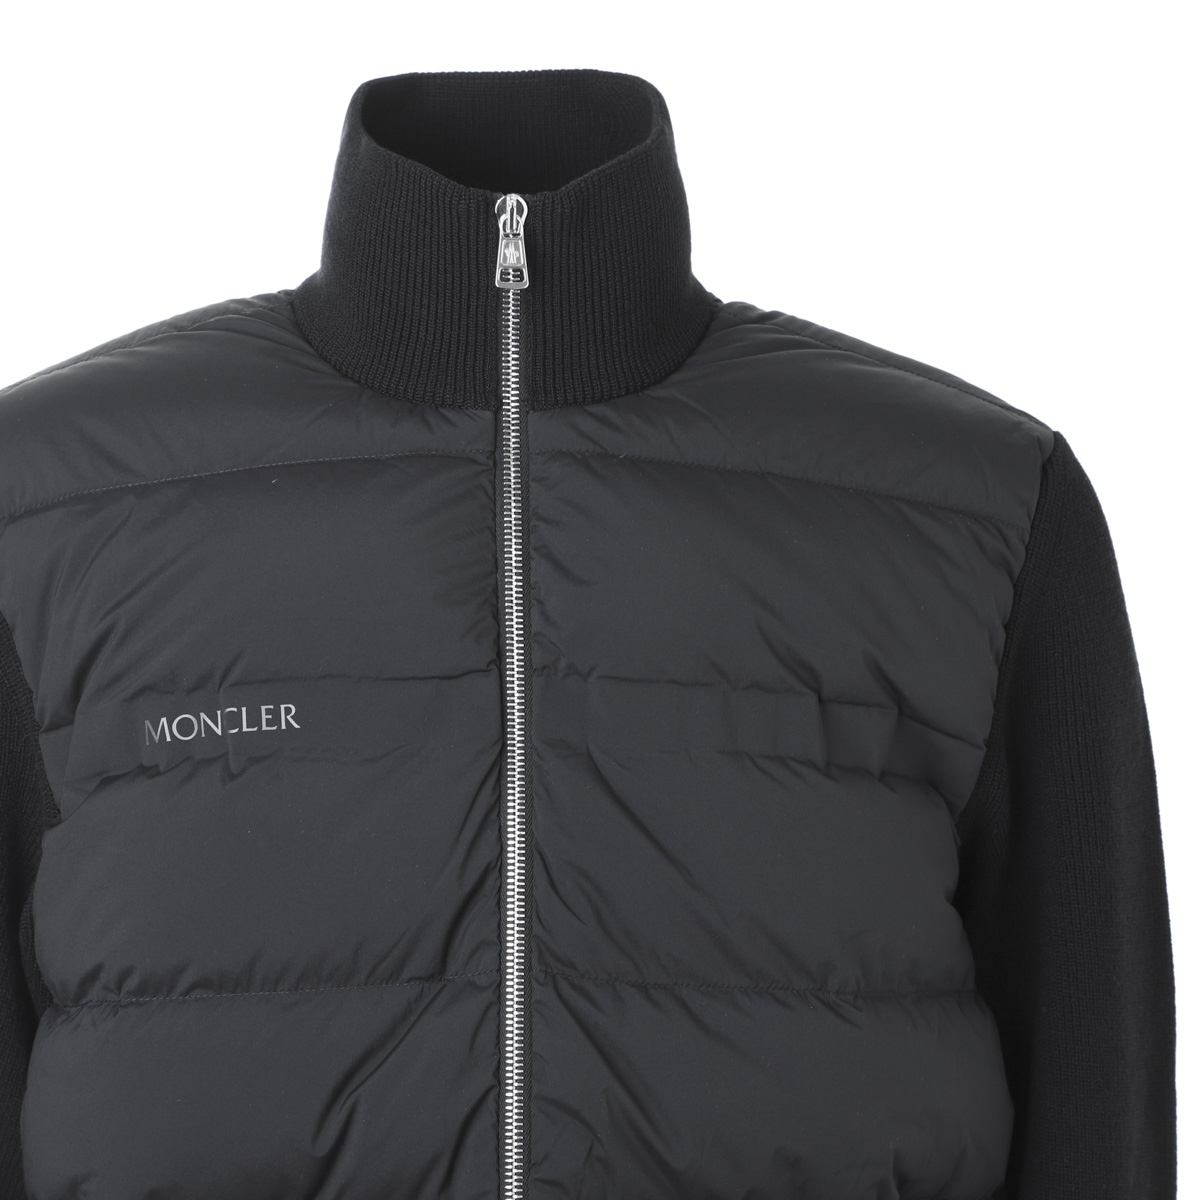 MONCLER R Mens Black Recycled Jersey Zip-Up Hoodie 2022SS モンクレール ジップアップカーディガン メンズ ブラック 2022年春夏